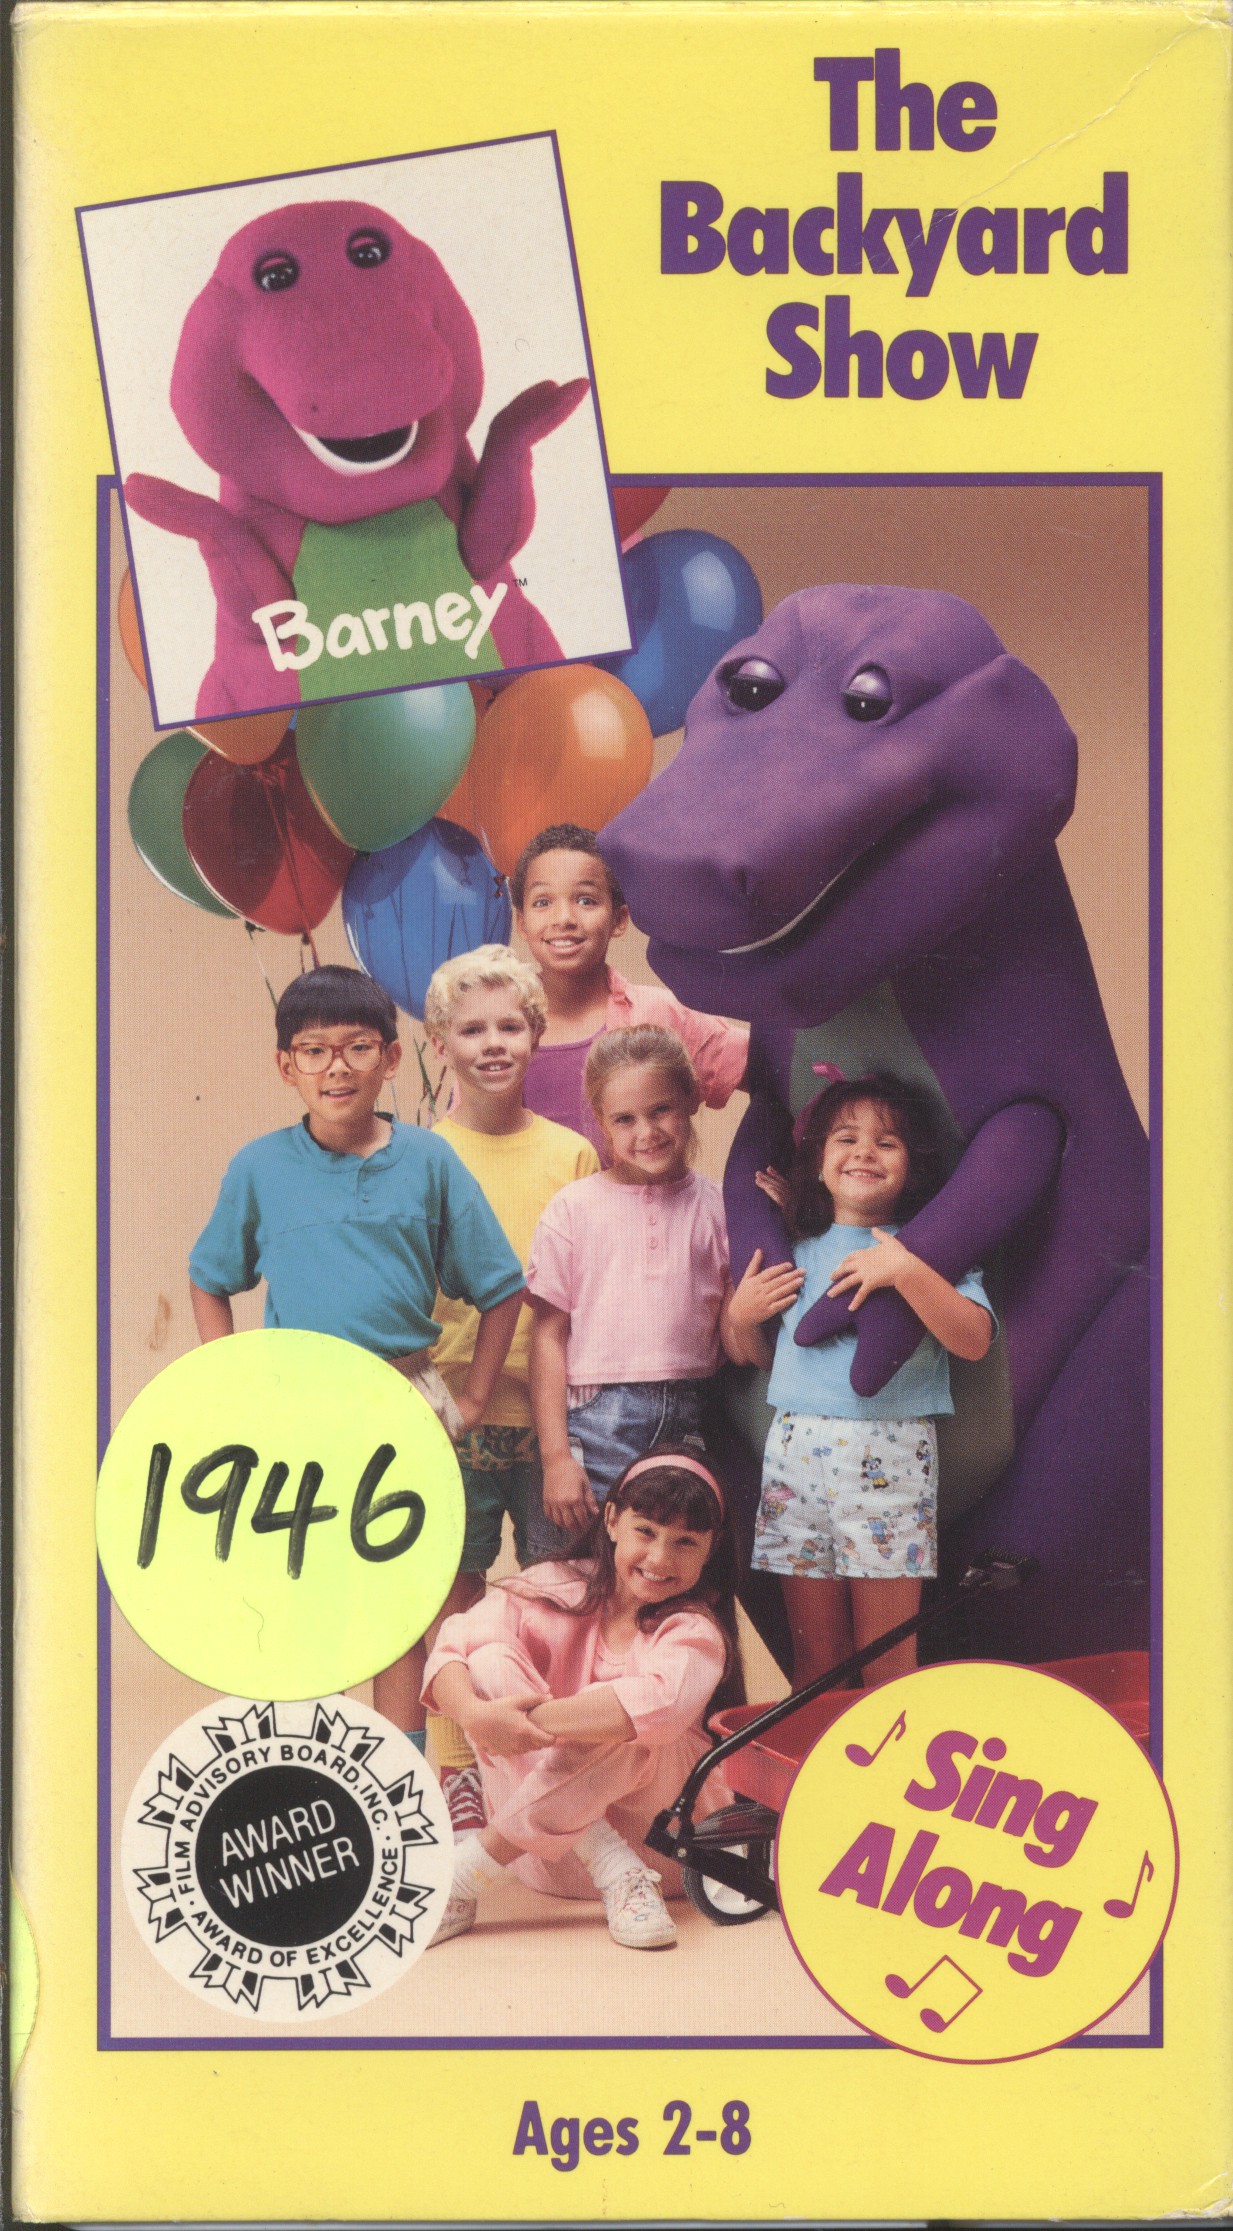 rex named barney, and a group of kids known as the backyard gang, and t...